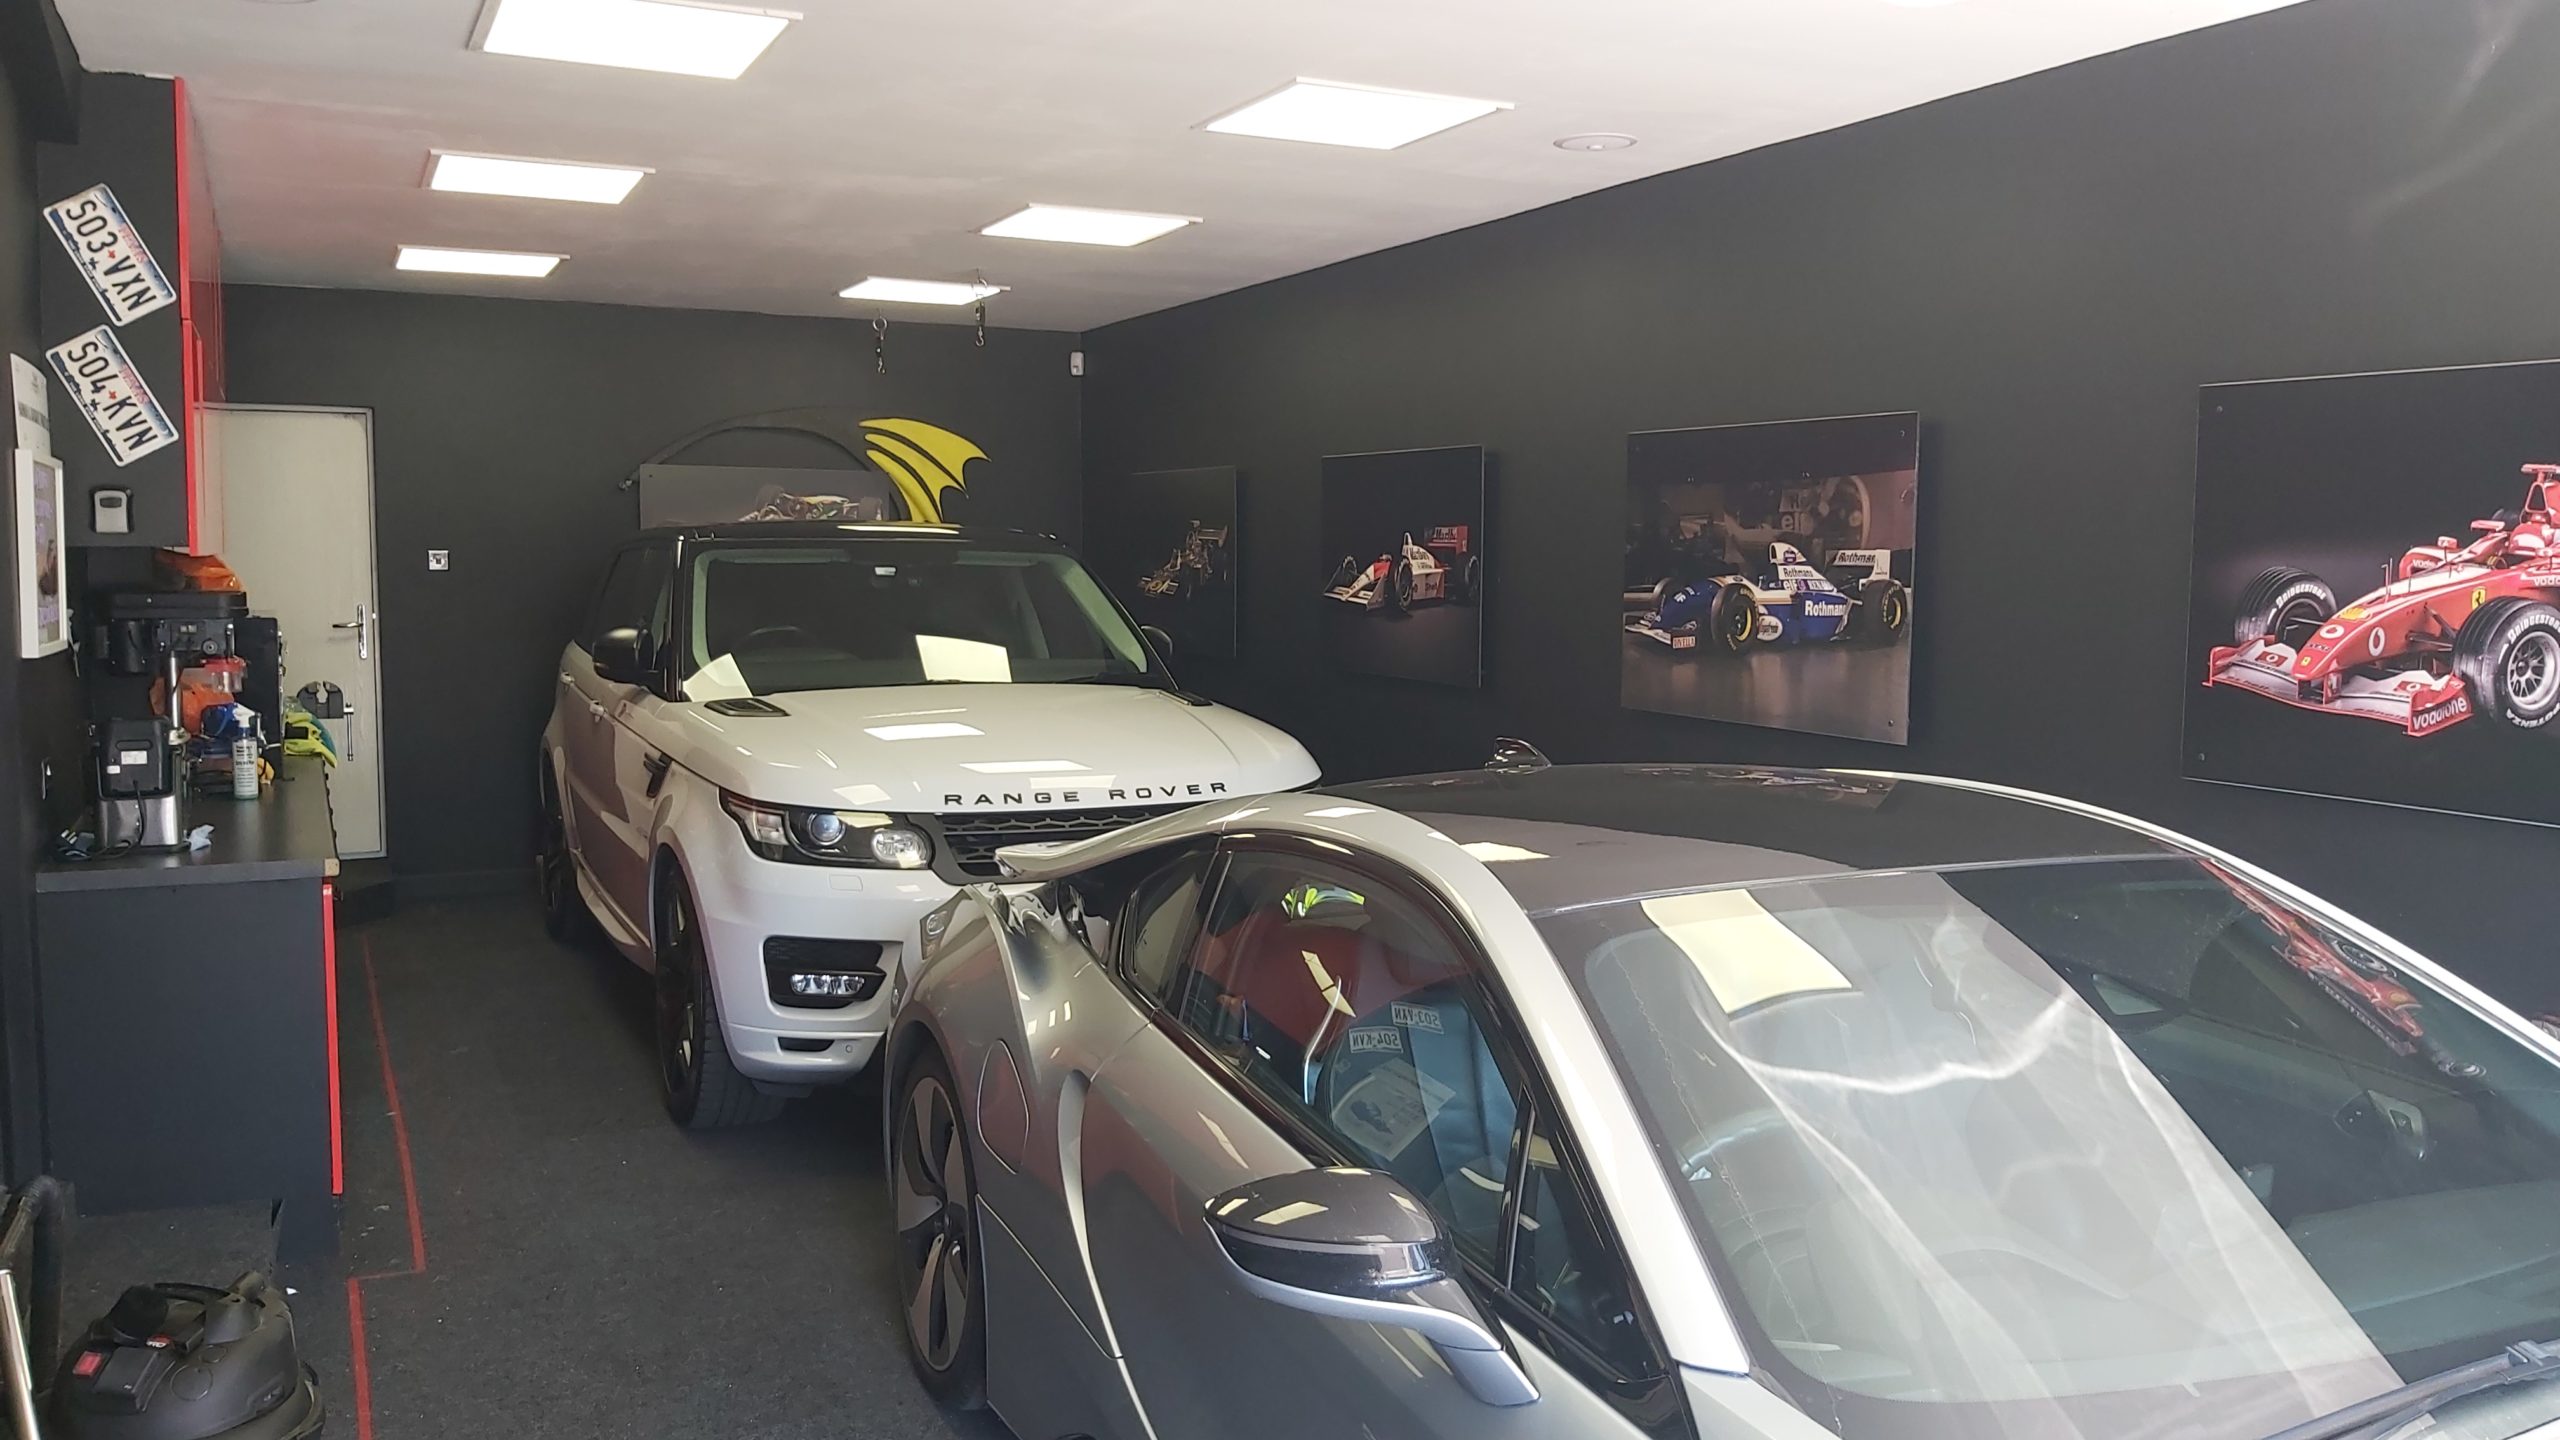 Range Rover and BMW parked in new garage